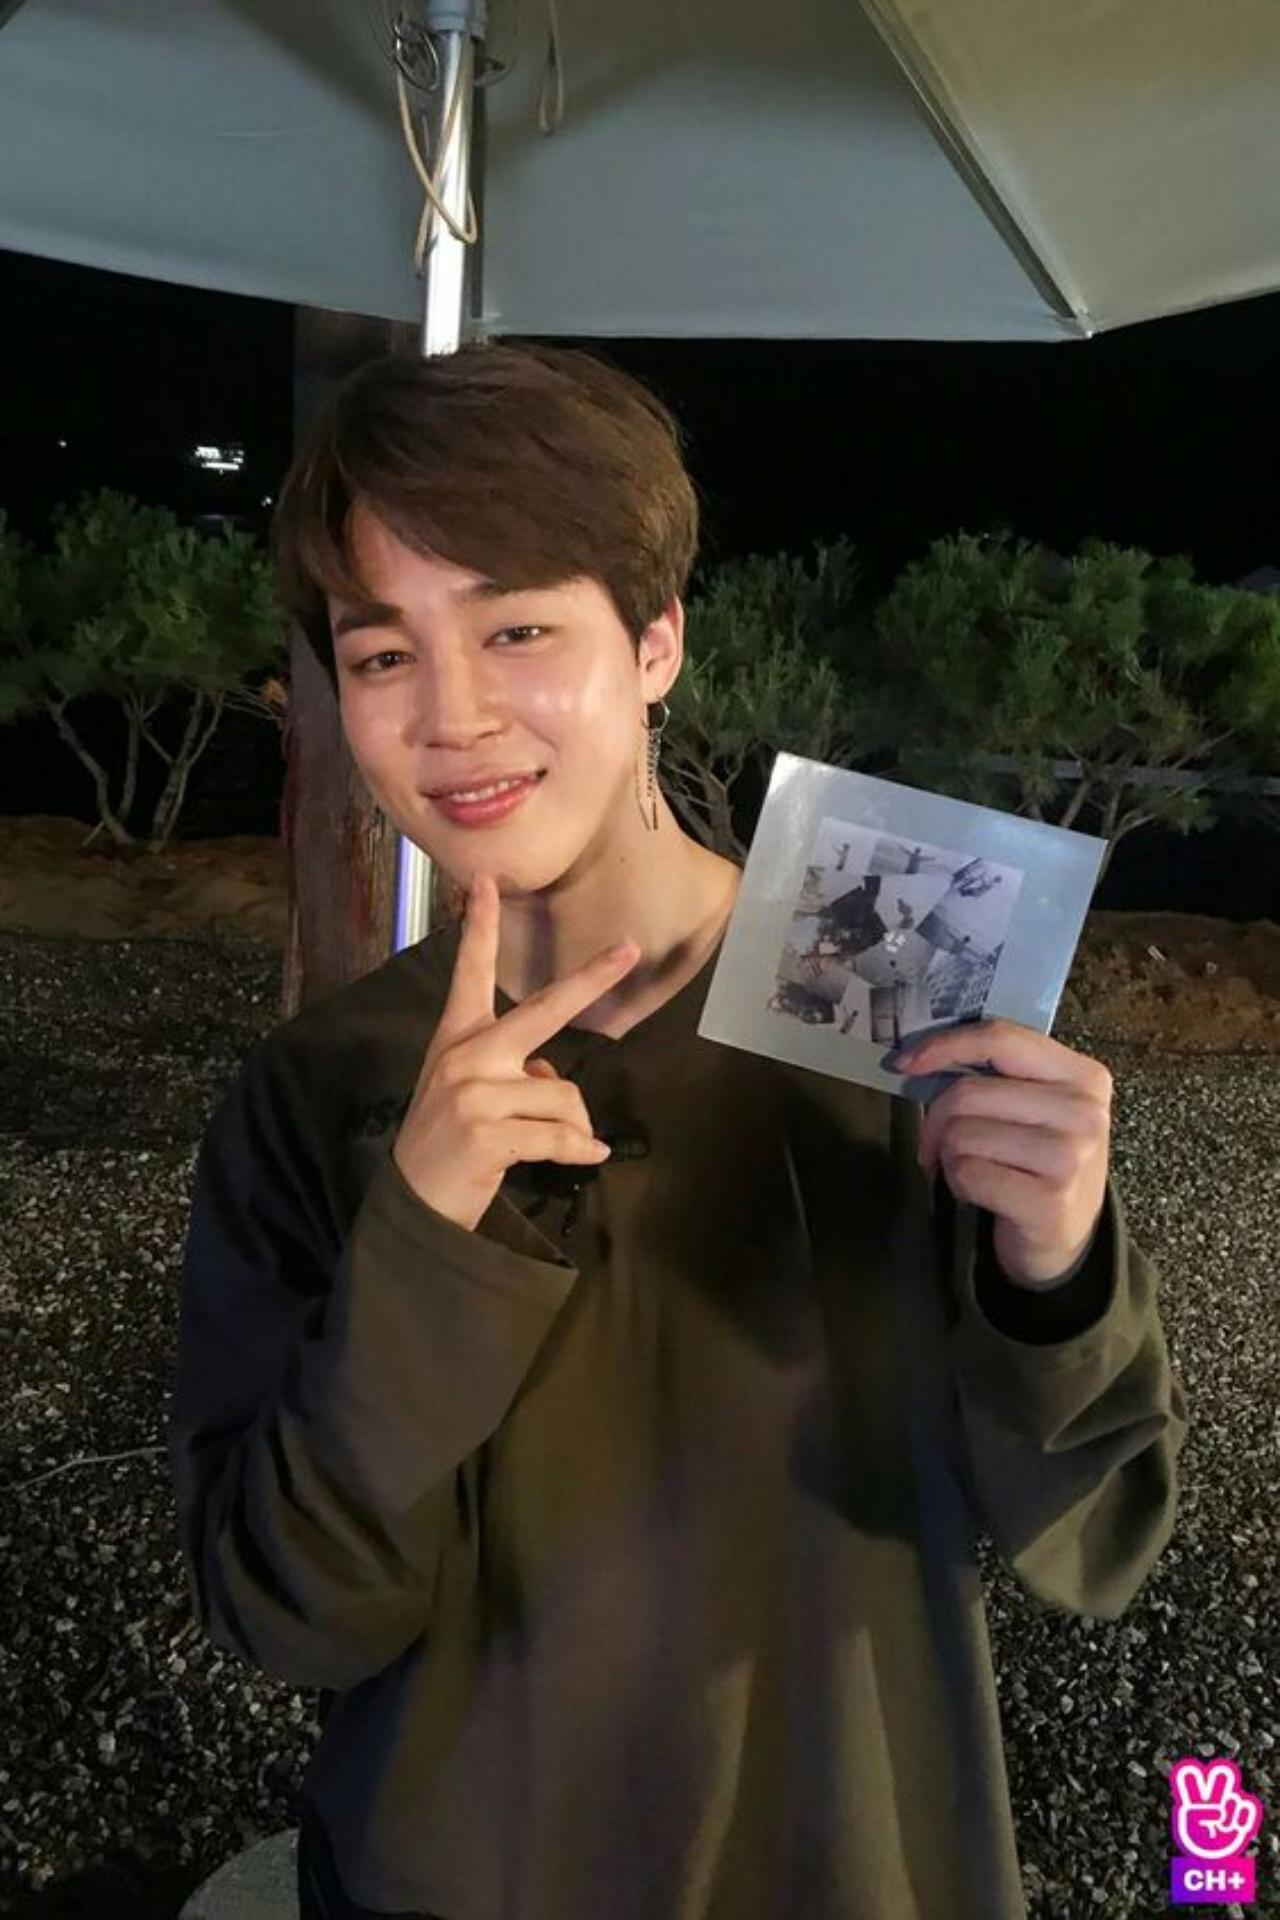 Jimin released his first solo single 'Promise' in 2018. The track was released on Souncloud. During a secret Santa game, Taehyung gifted a special CD to Jimin onto which he had burned the song - he told Jimin that 'this is the only CD in the world to have Promise!' These two are seriously friendship goals